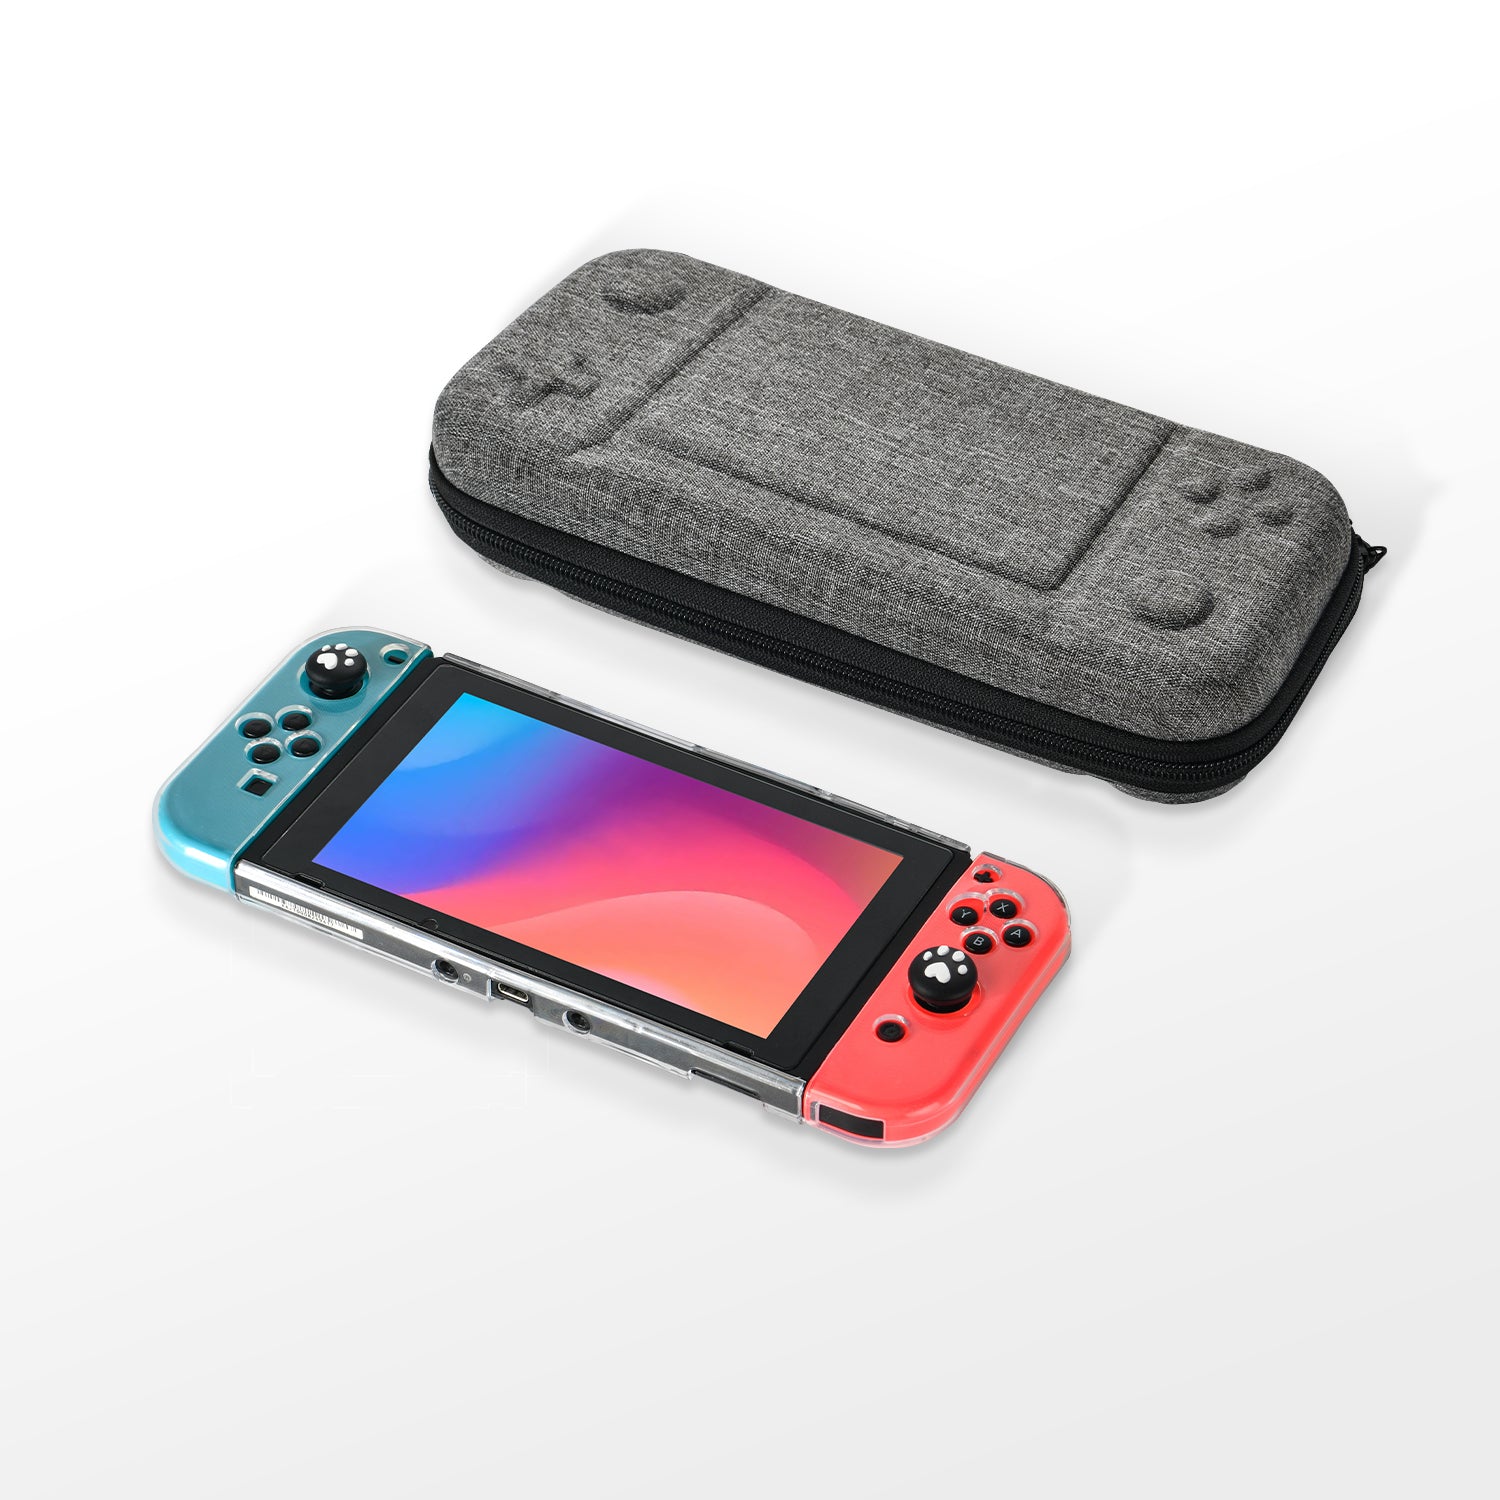 Younik Button Design Travel Case for Switch, Nintendo Switch Carrying Case